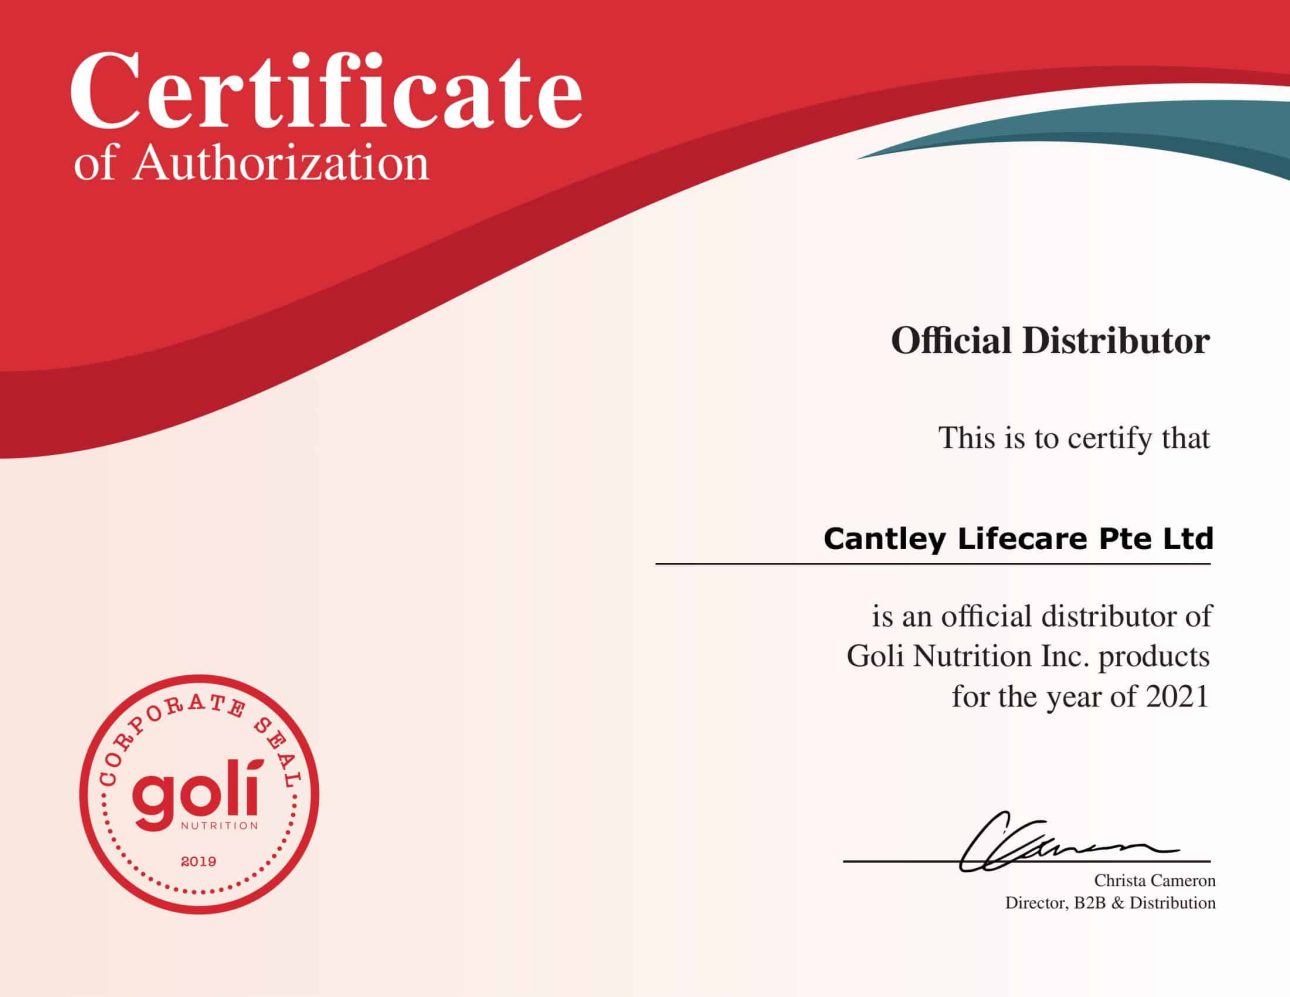 Official_Distributor_Certificate_2021_ Cantley Lifecare Pte Ltd-1